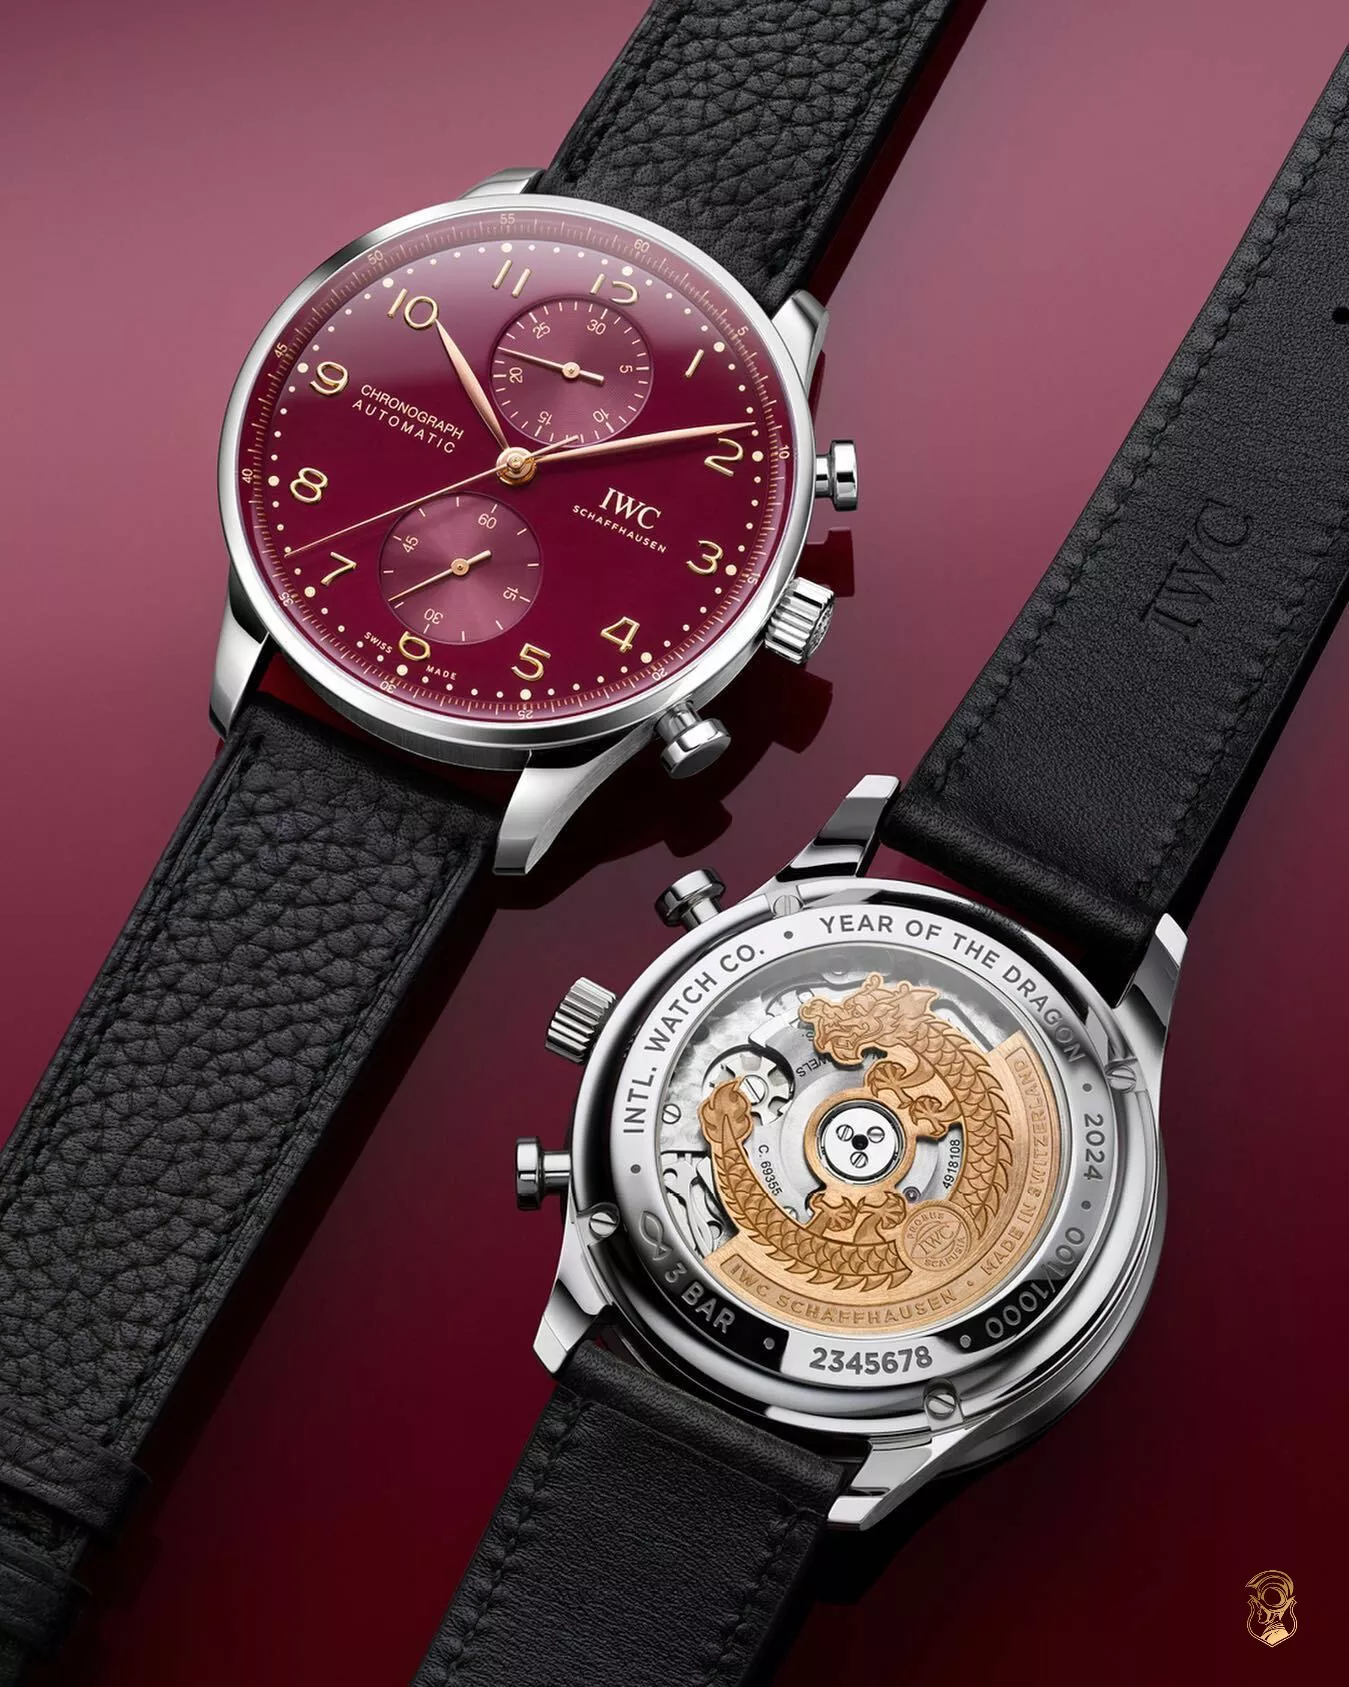 IWC Portugieser Year Of The Dragon Limited Watch 41mm